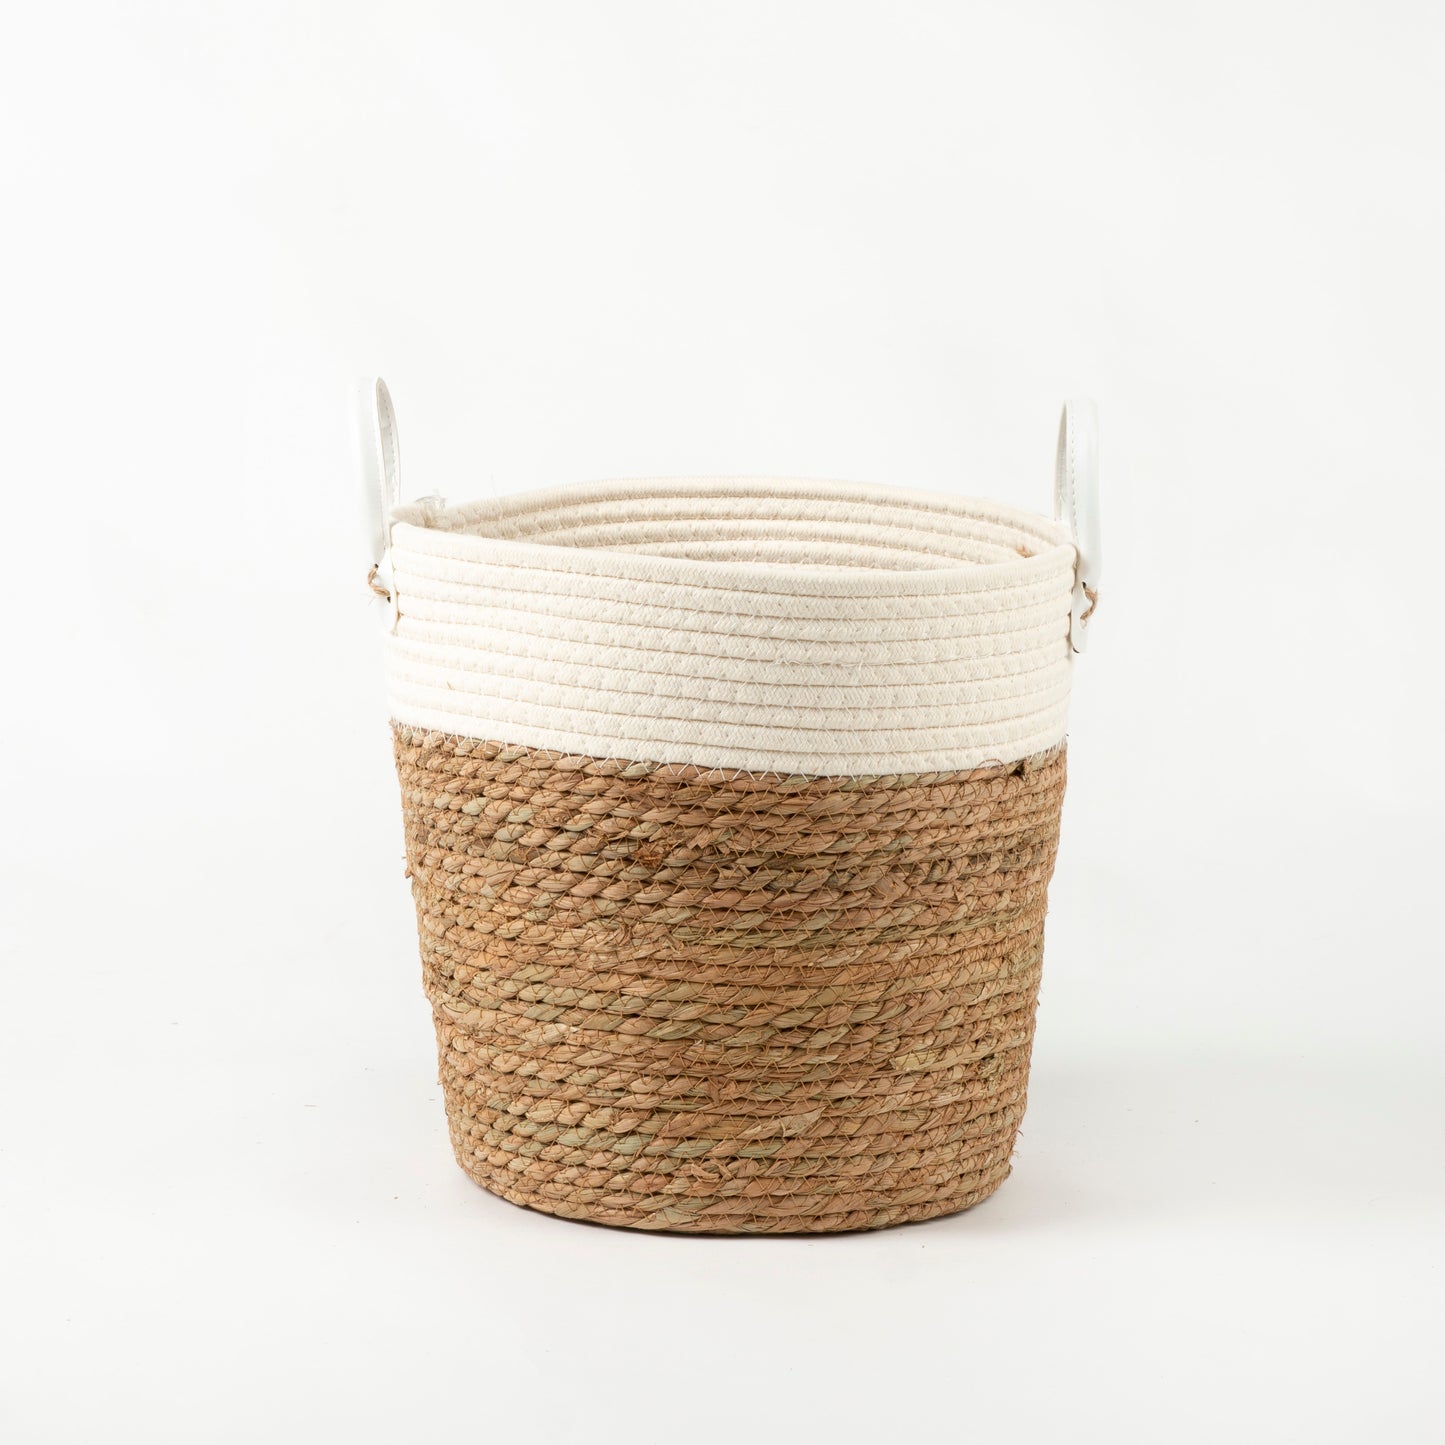 White Two-tone Basket with Leather Handles